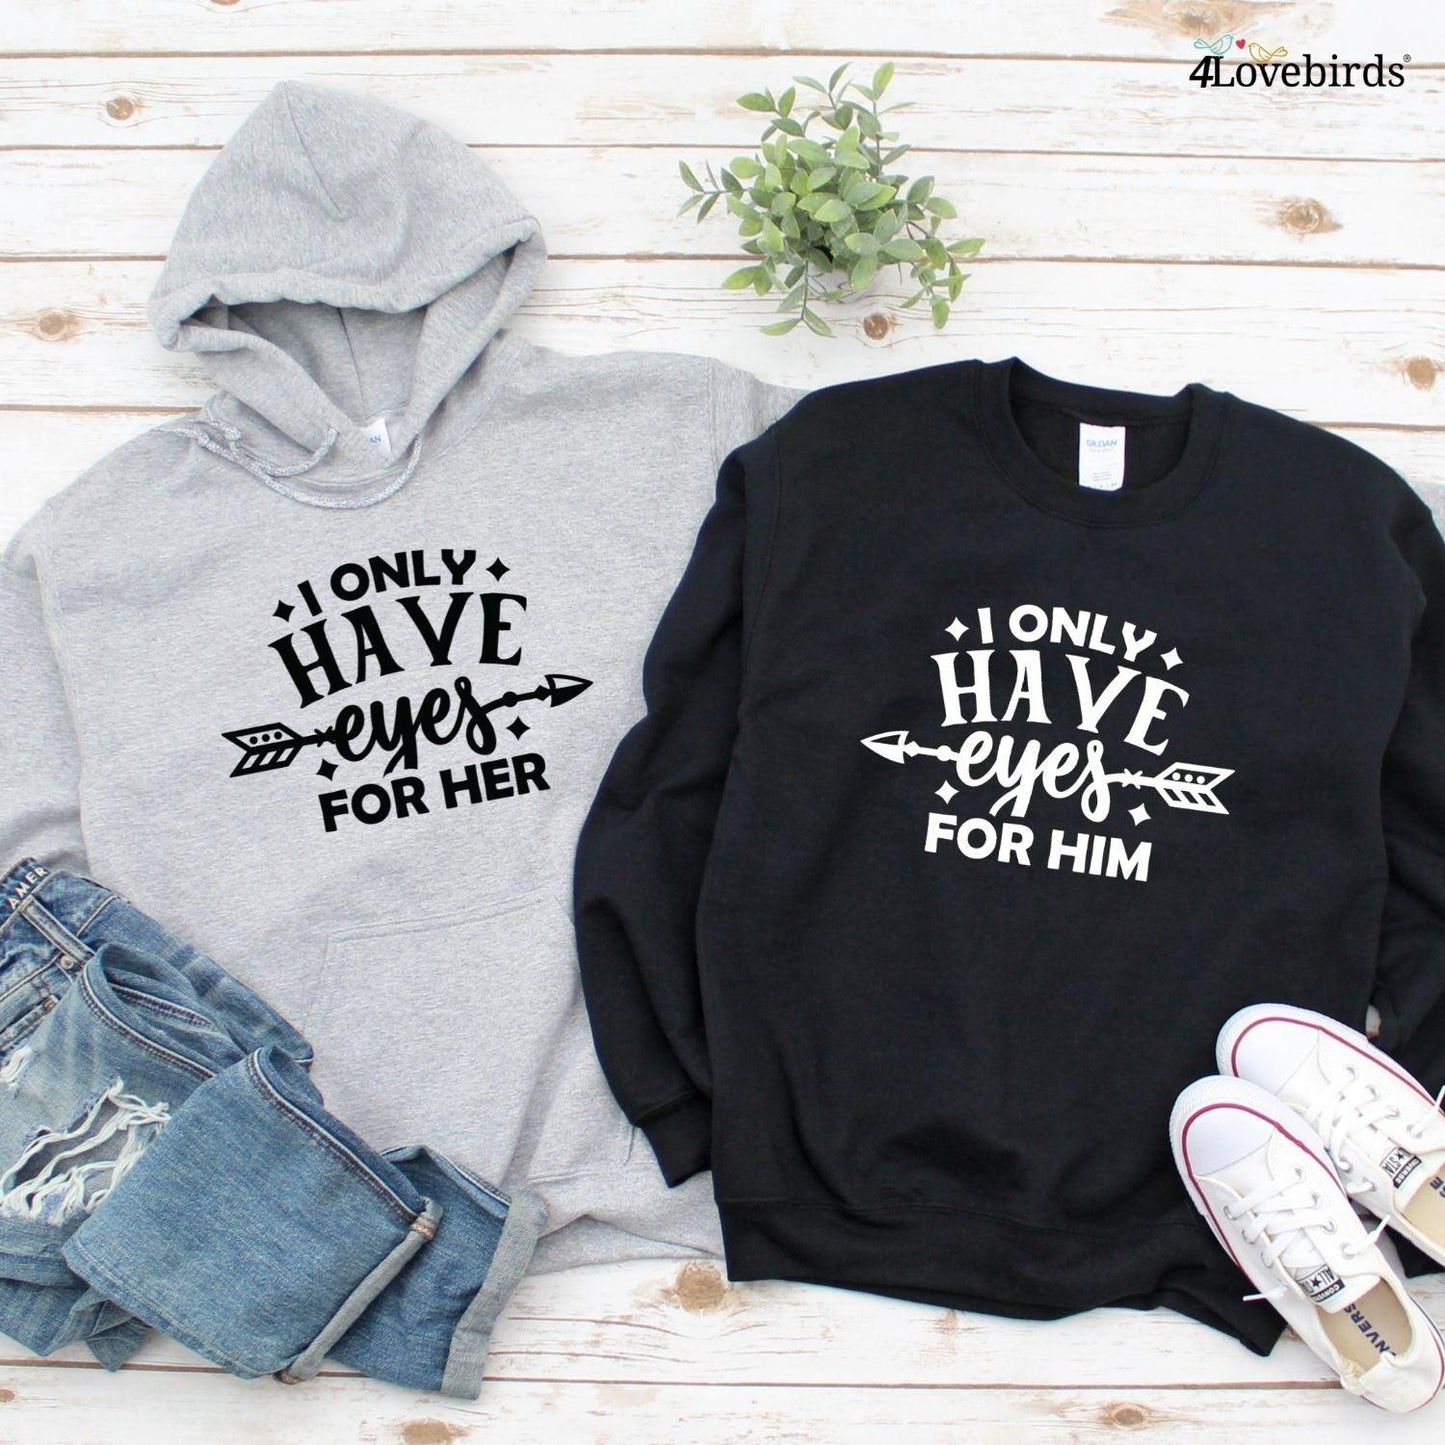 I Only Have Eyes For Him/Her Adorable Matching Sets - Couples Gifts - 4Lovebirds